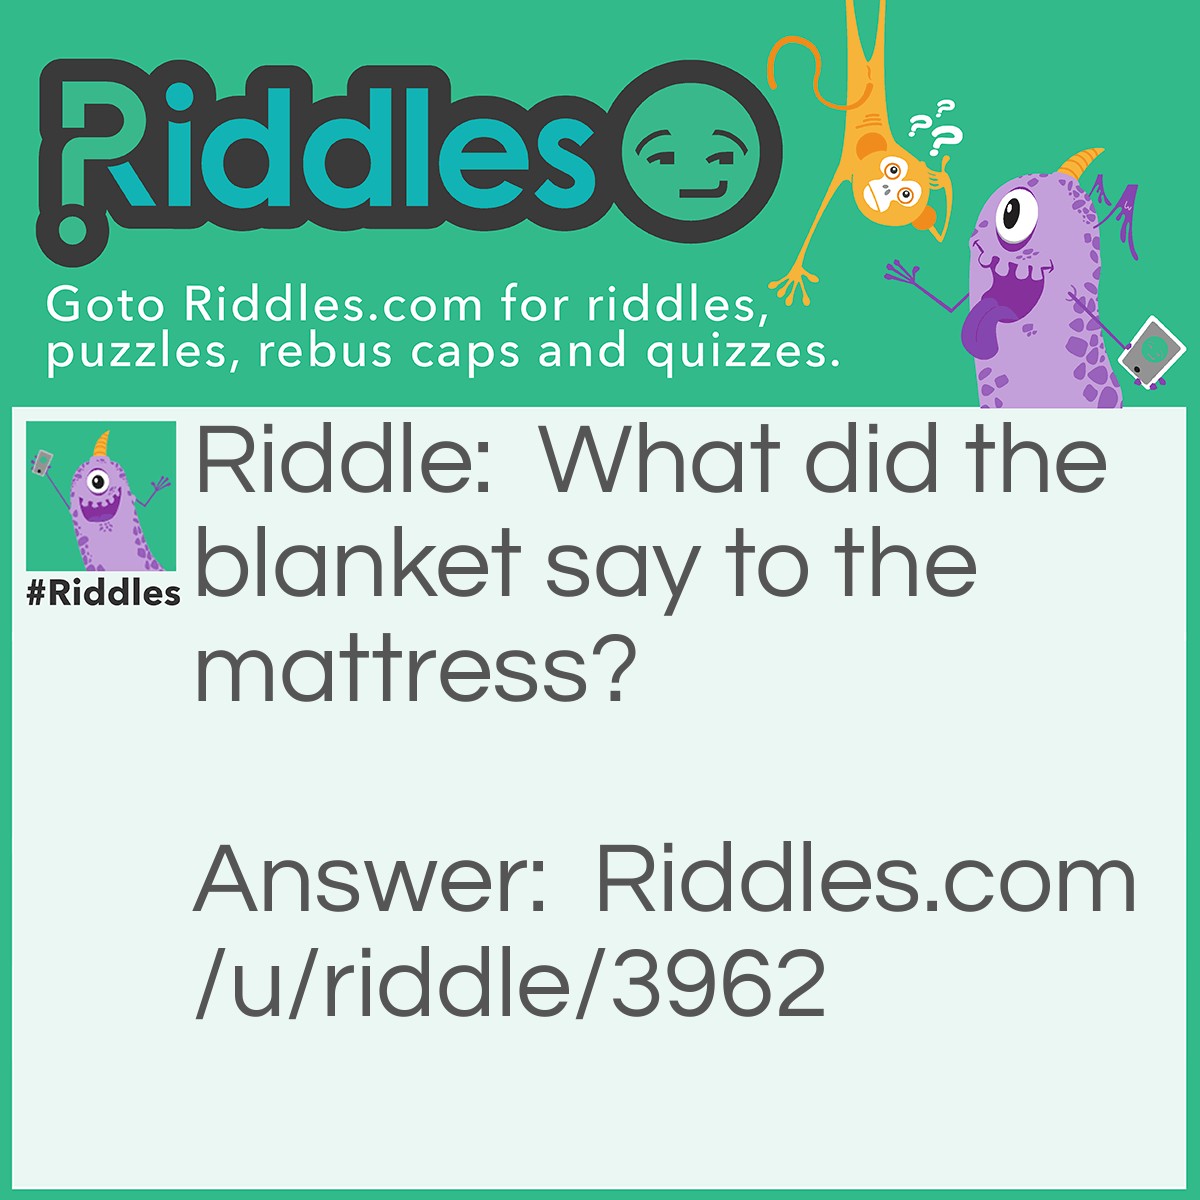 Riddle: What did the blanket say to the mattress? Answer: "I've got you covered."